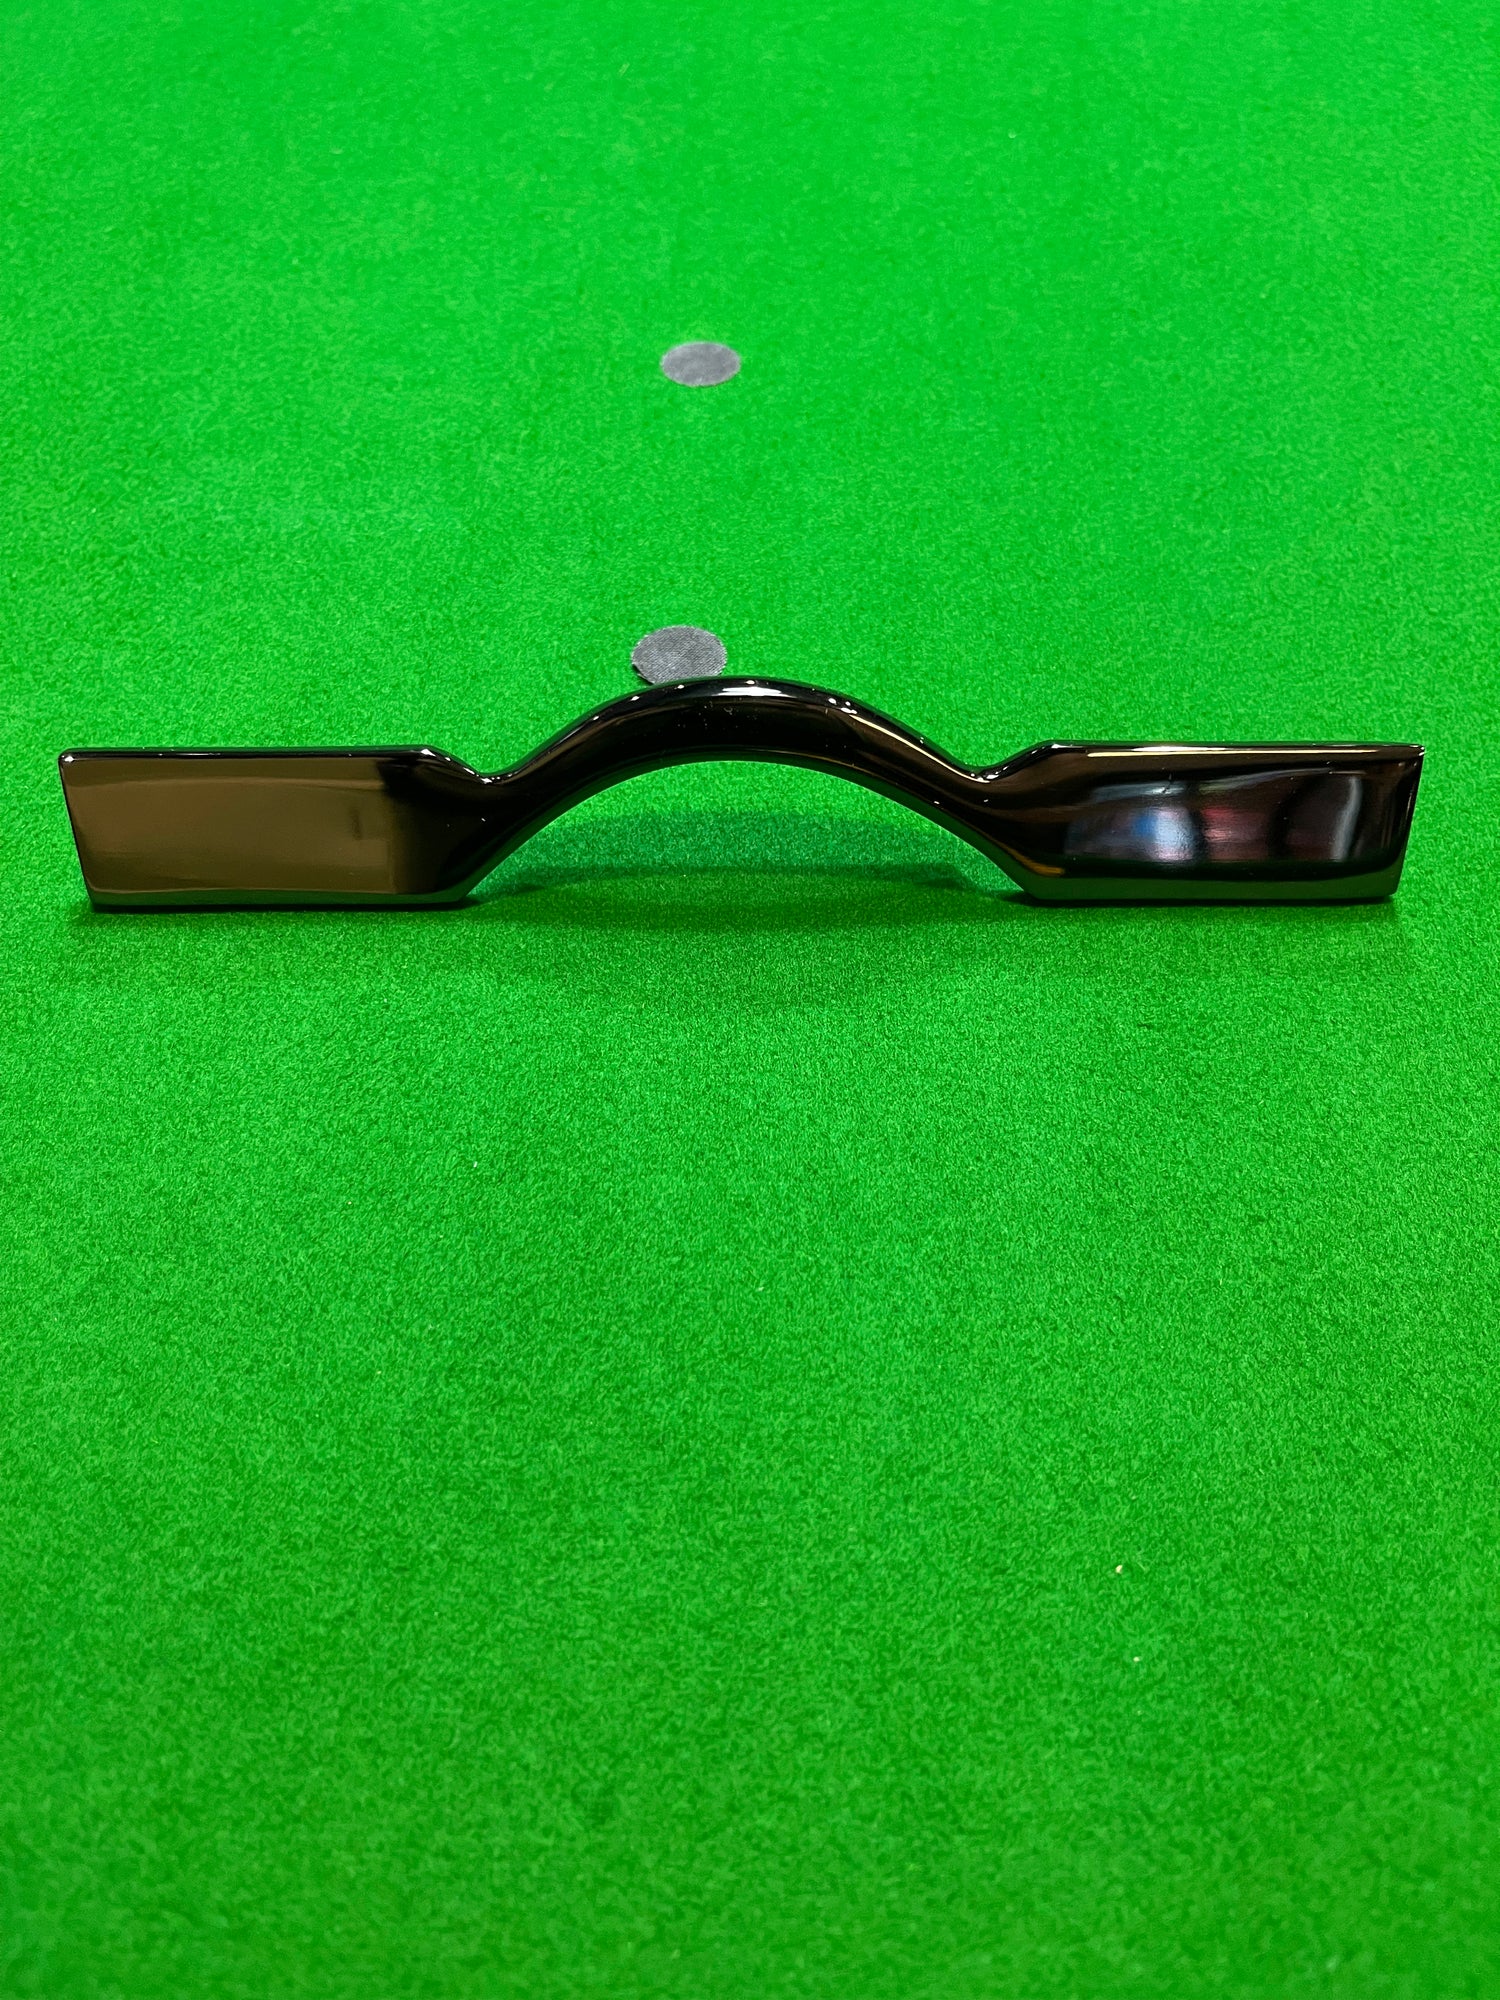 Deluxe Quality Solid Pool, Snooker, Billiard Table Pocket Brackets Heavy Boss Square - Q-Masters